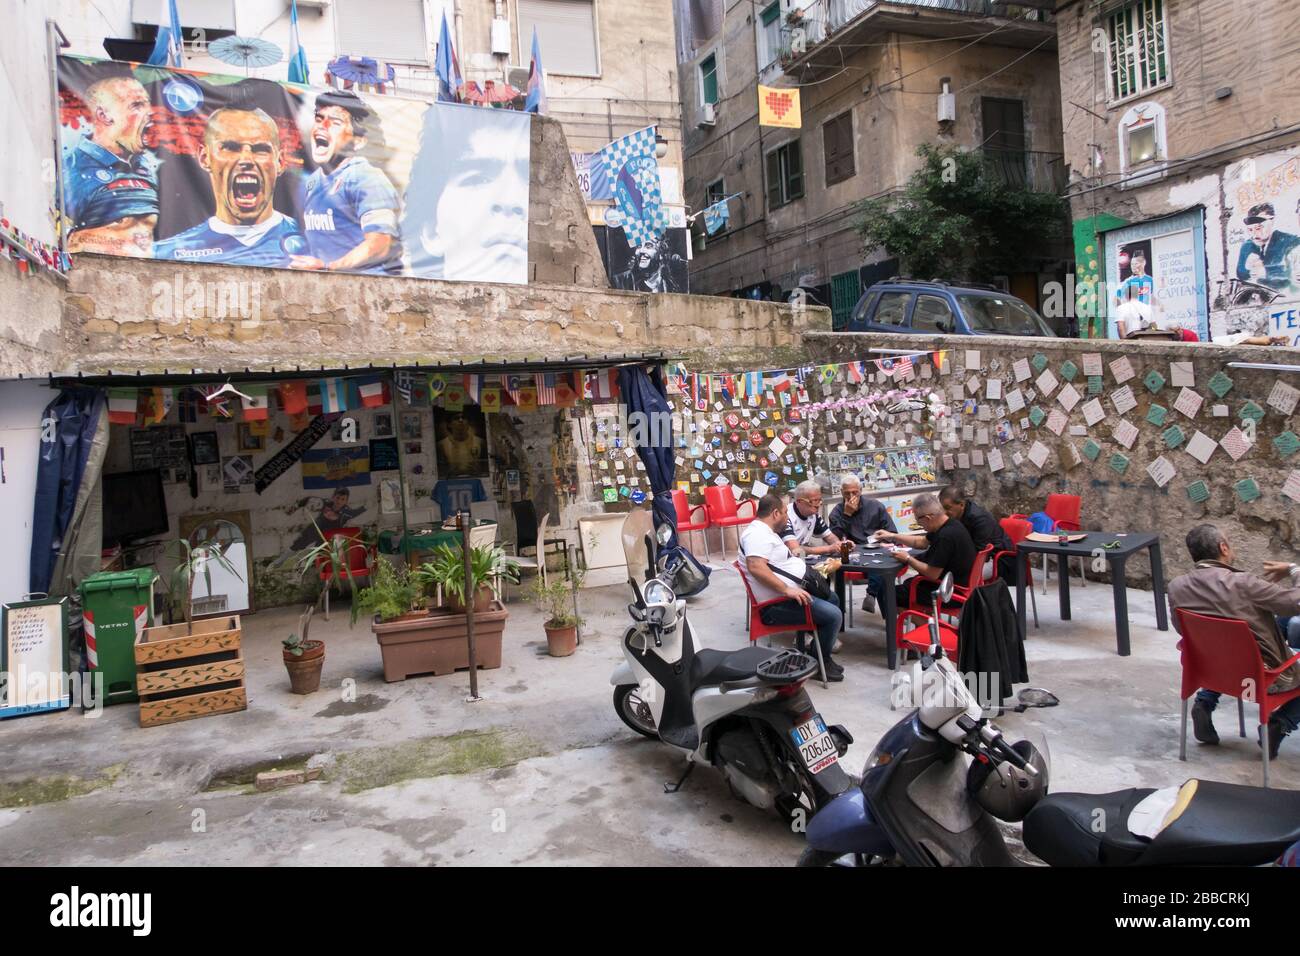 People playing cards in the Spanish Quarter of Naples under a poster of Napoli football club's players Stock Photo